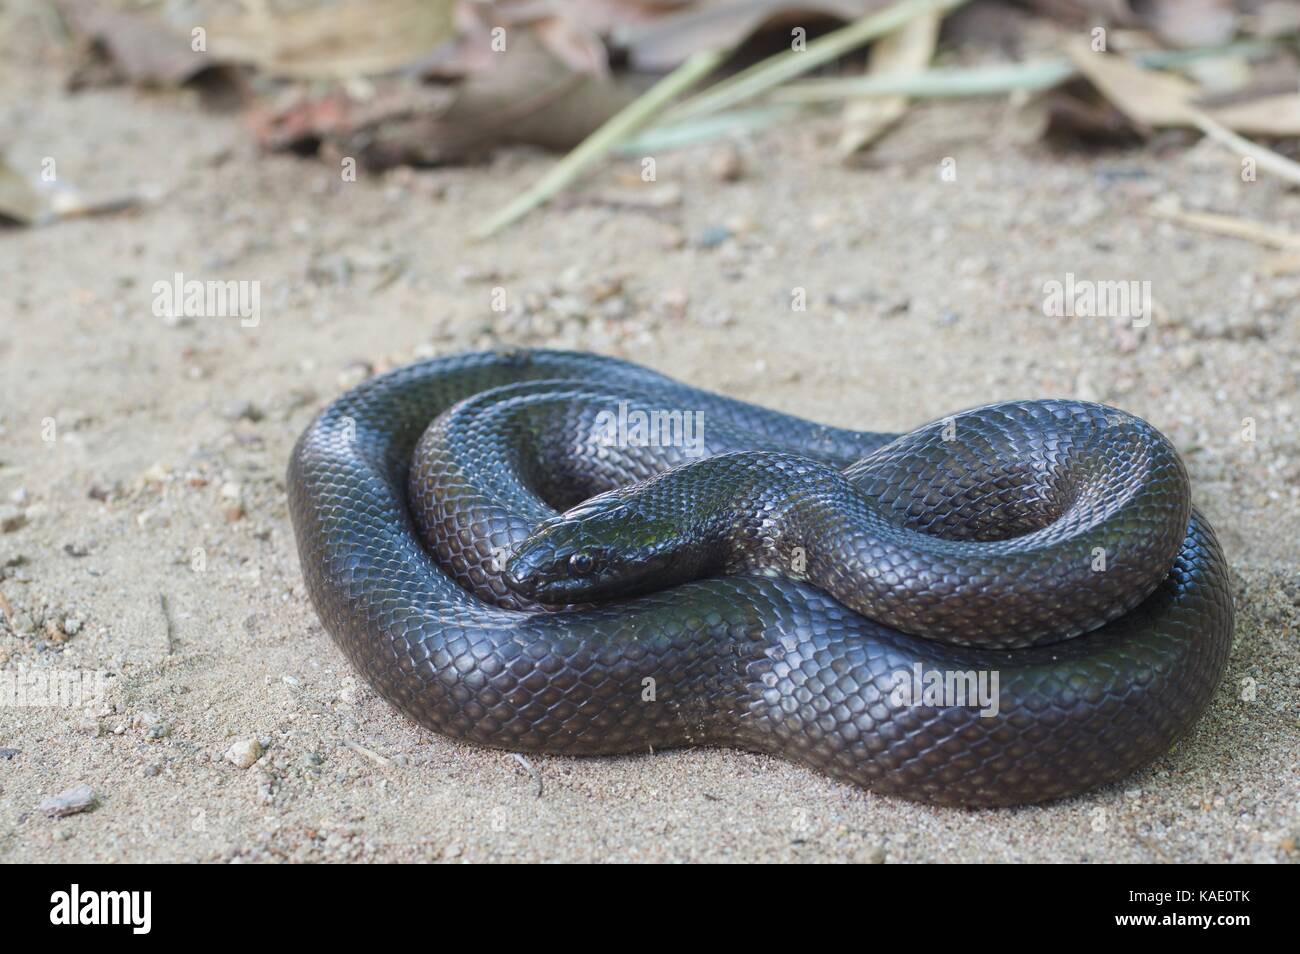 A Mexican Black Kingsnake (Lampropeltis nigrita) coiled on sandy ground in Álamos, Sonora, Mexico Stock Photo